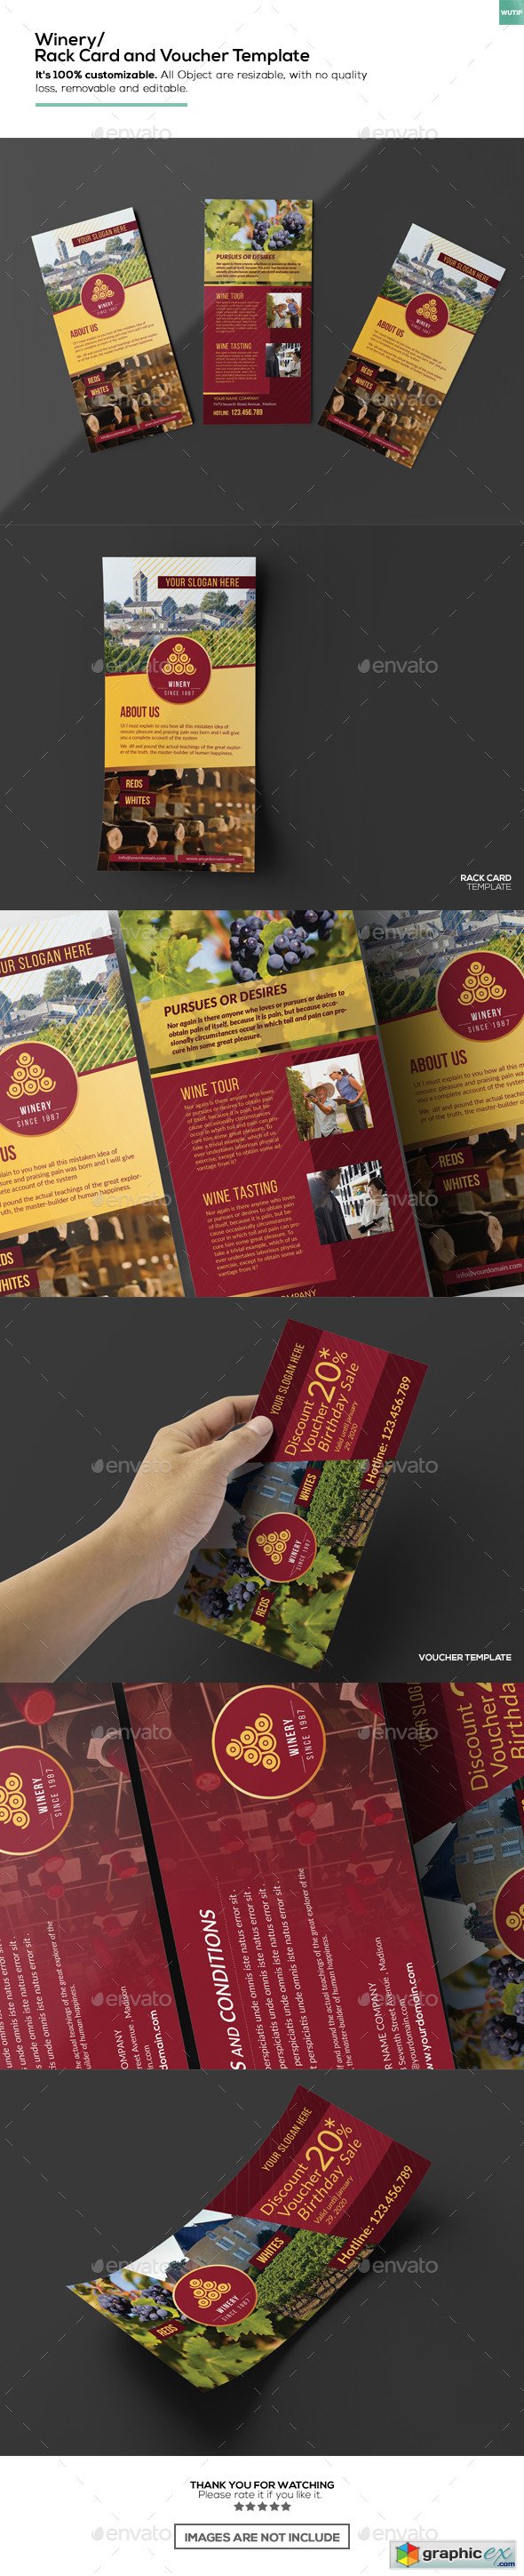 Winery/ Rack Card and Voucher Template